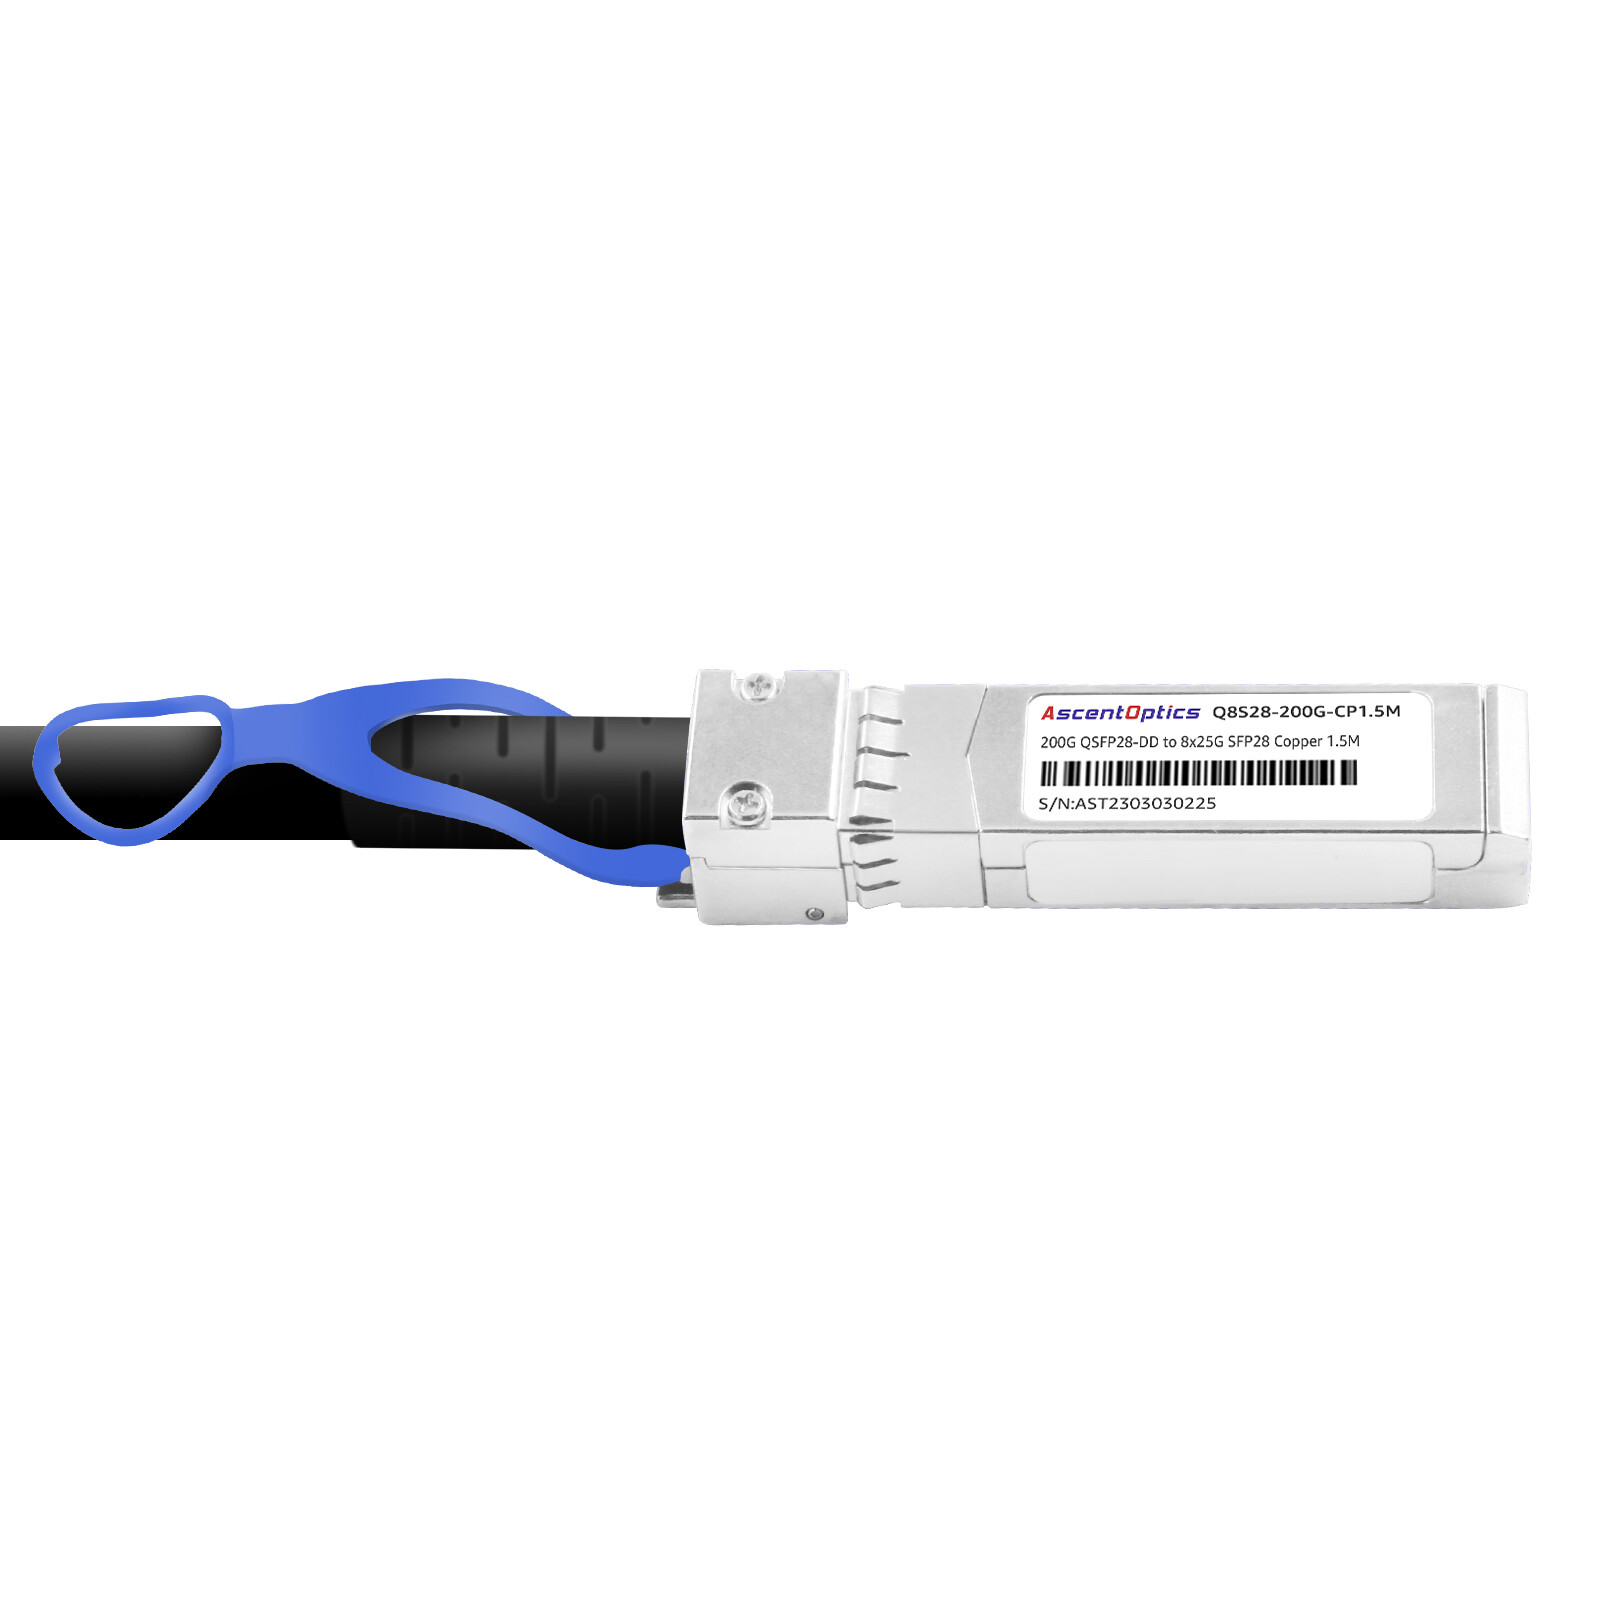 200G QSFP28-DD to 8x 25G SFP28 Copper Breakout Cable,1.5 Meter,Passive